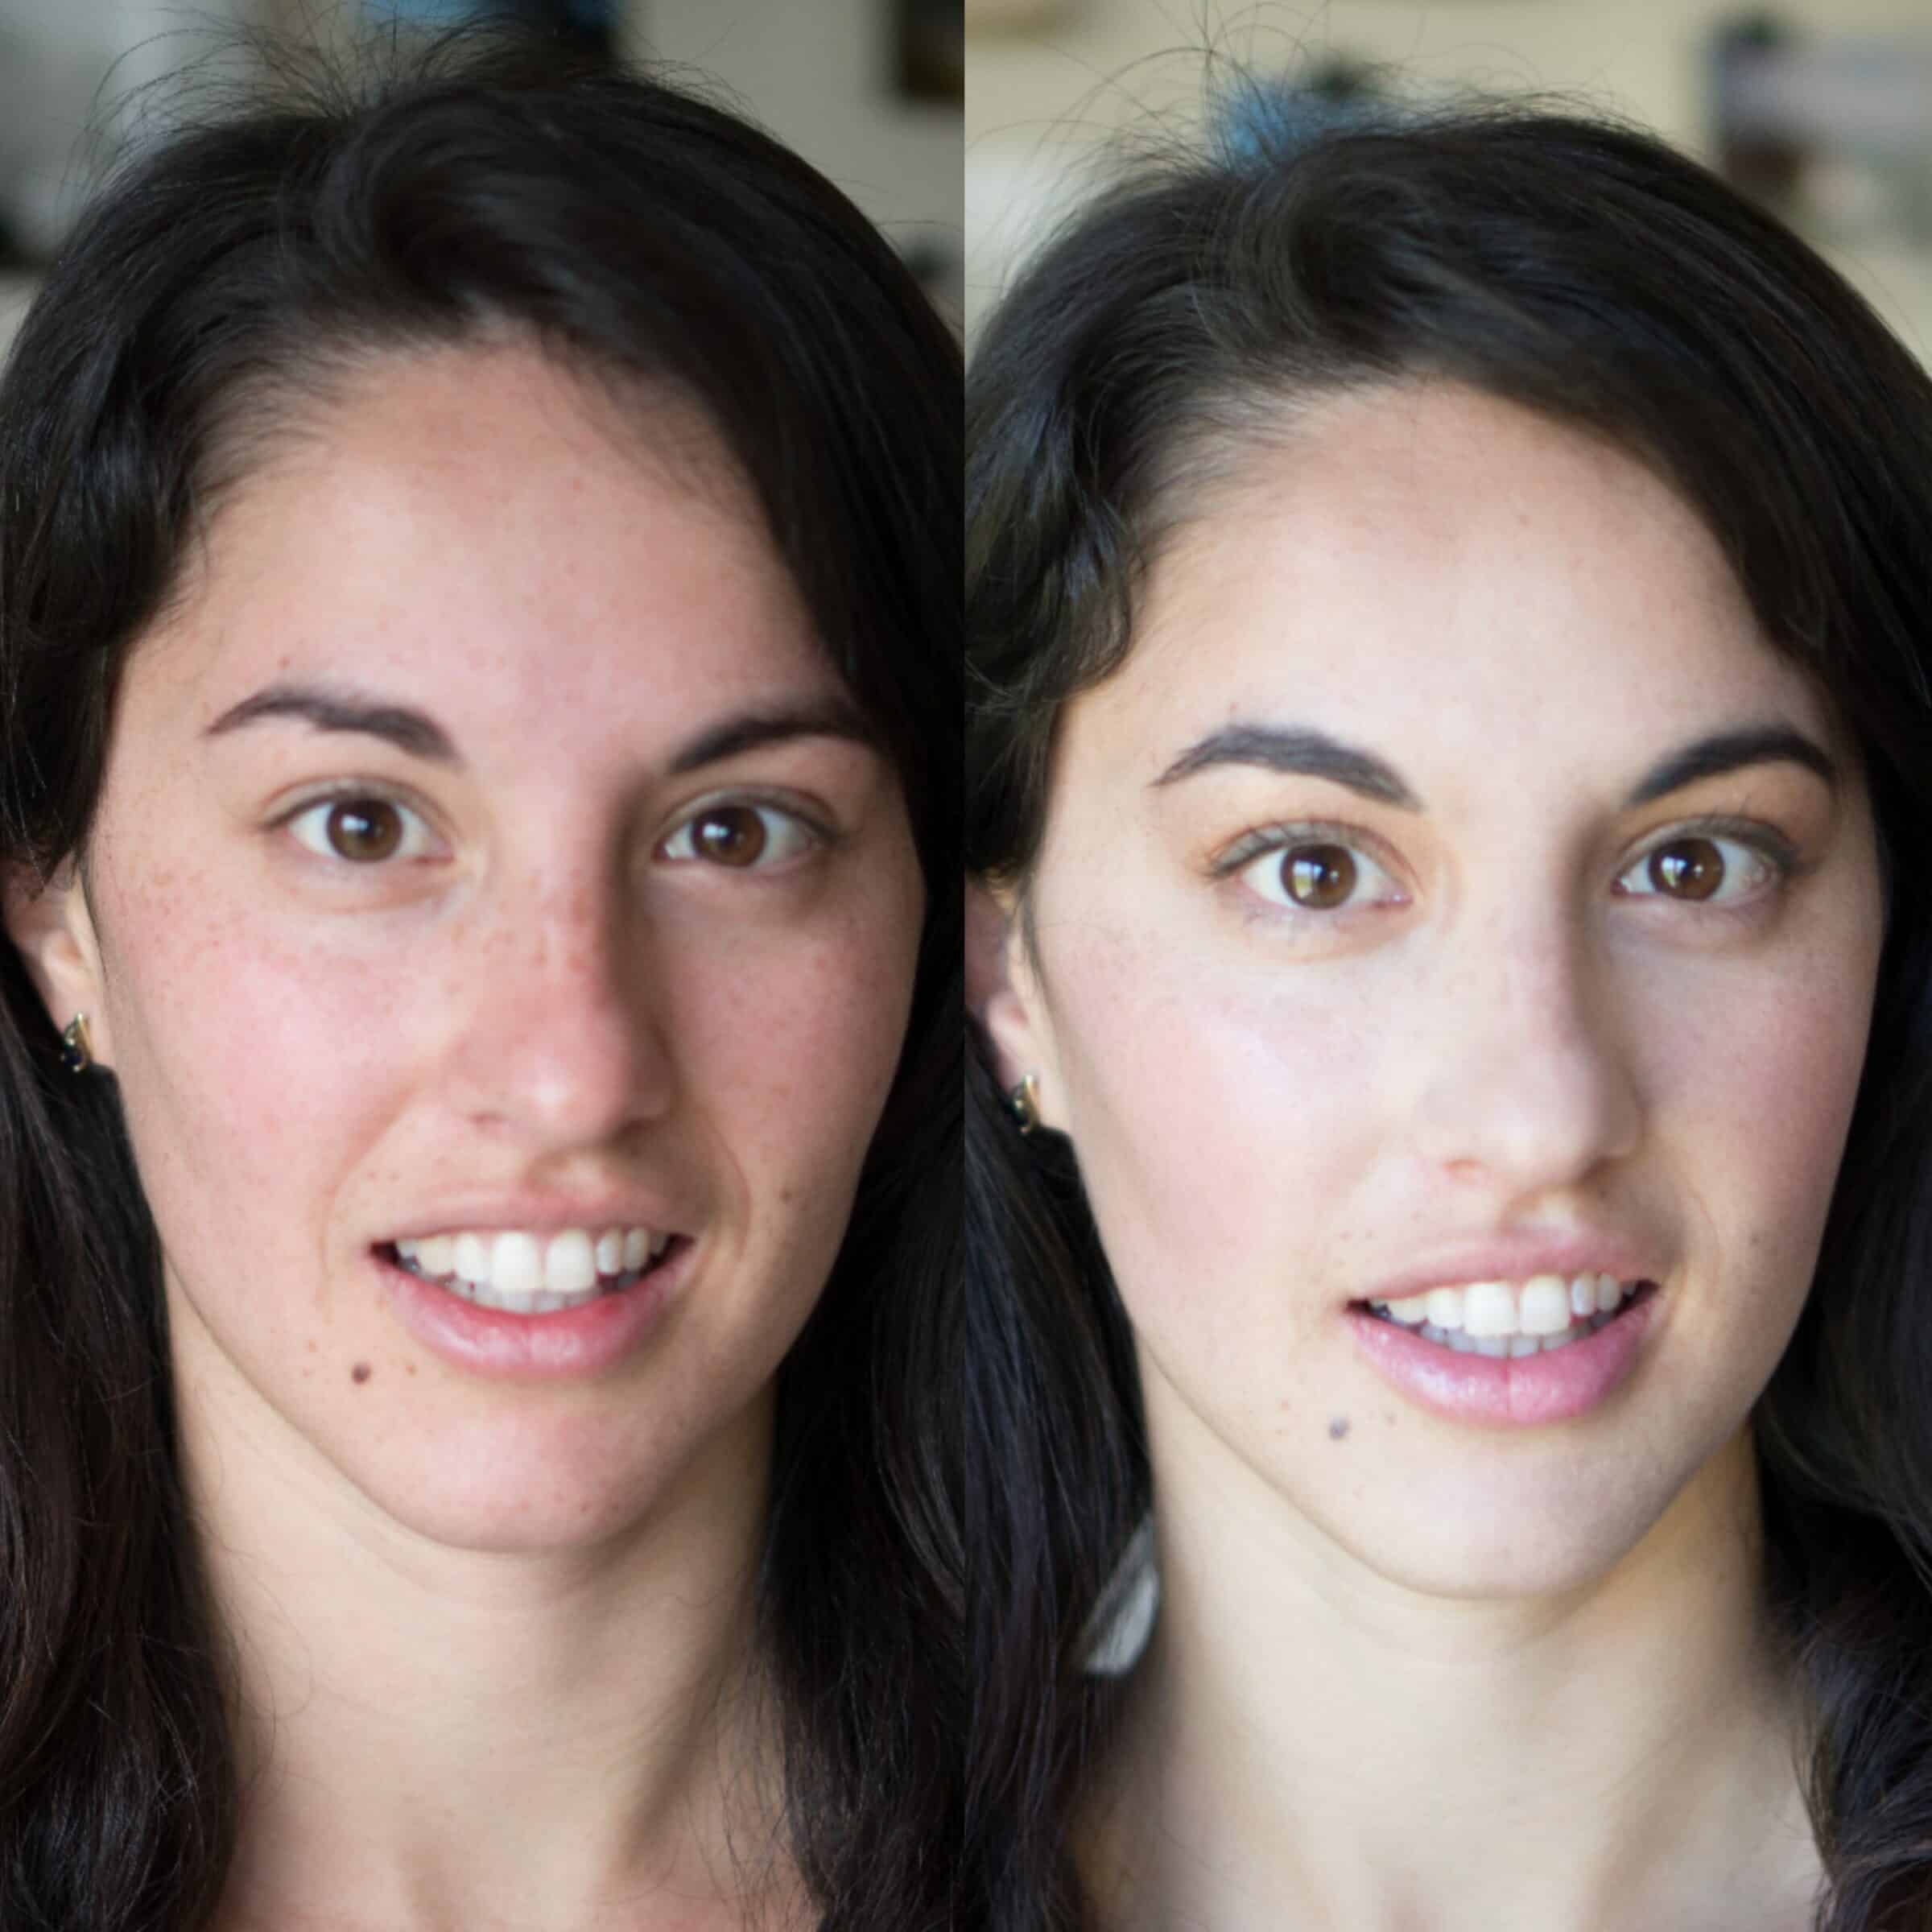 Before and after with Maskcara makeup on www.maskcarabeautygirl.com, we share a simple and natural every day look that can be easily achieved with one compact from Maskcara Beauty